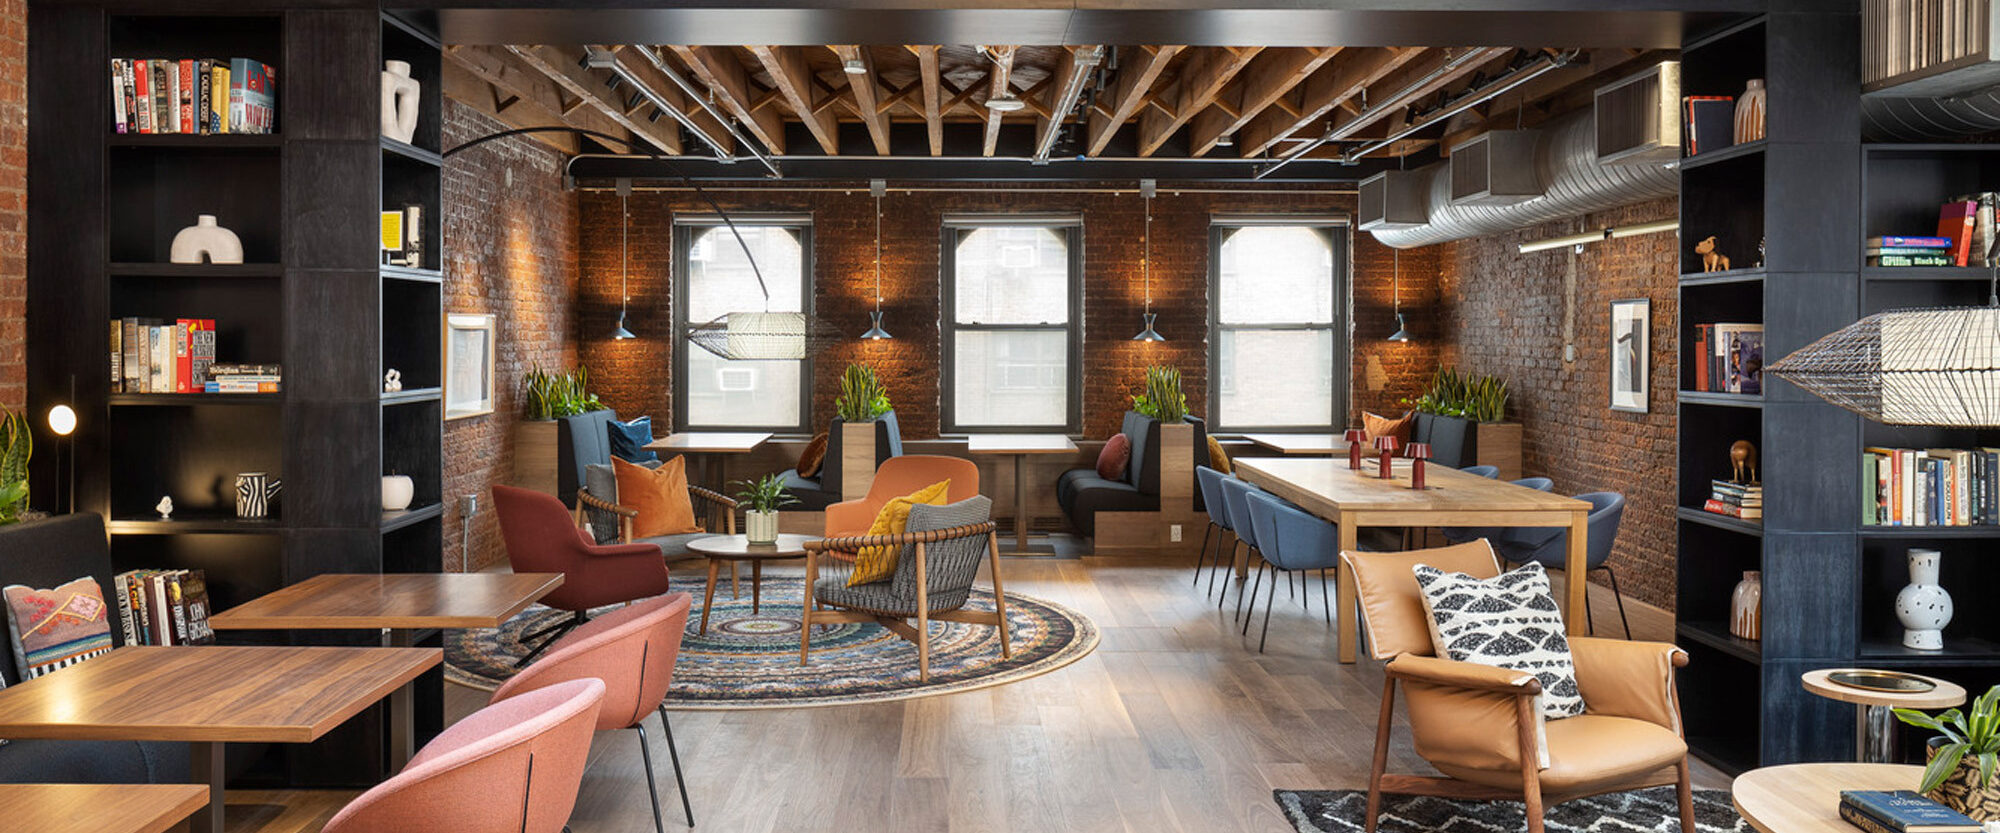 Spacious industrial loft featuring exposed brick walls and beam ceilings with contrasting modern furnishings in earth tones creates a warm, inviting atmosphere. Strategic lighting accentuates the bookshelves and seating areas, blending functionality with aesthetic appeal.